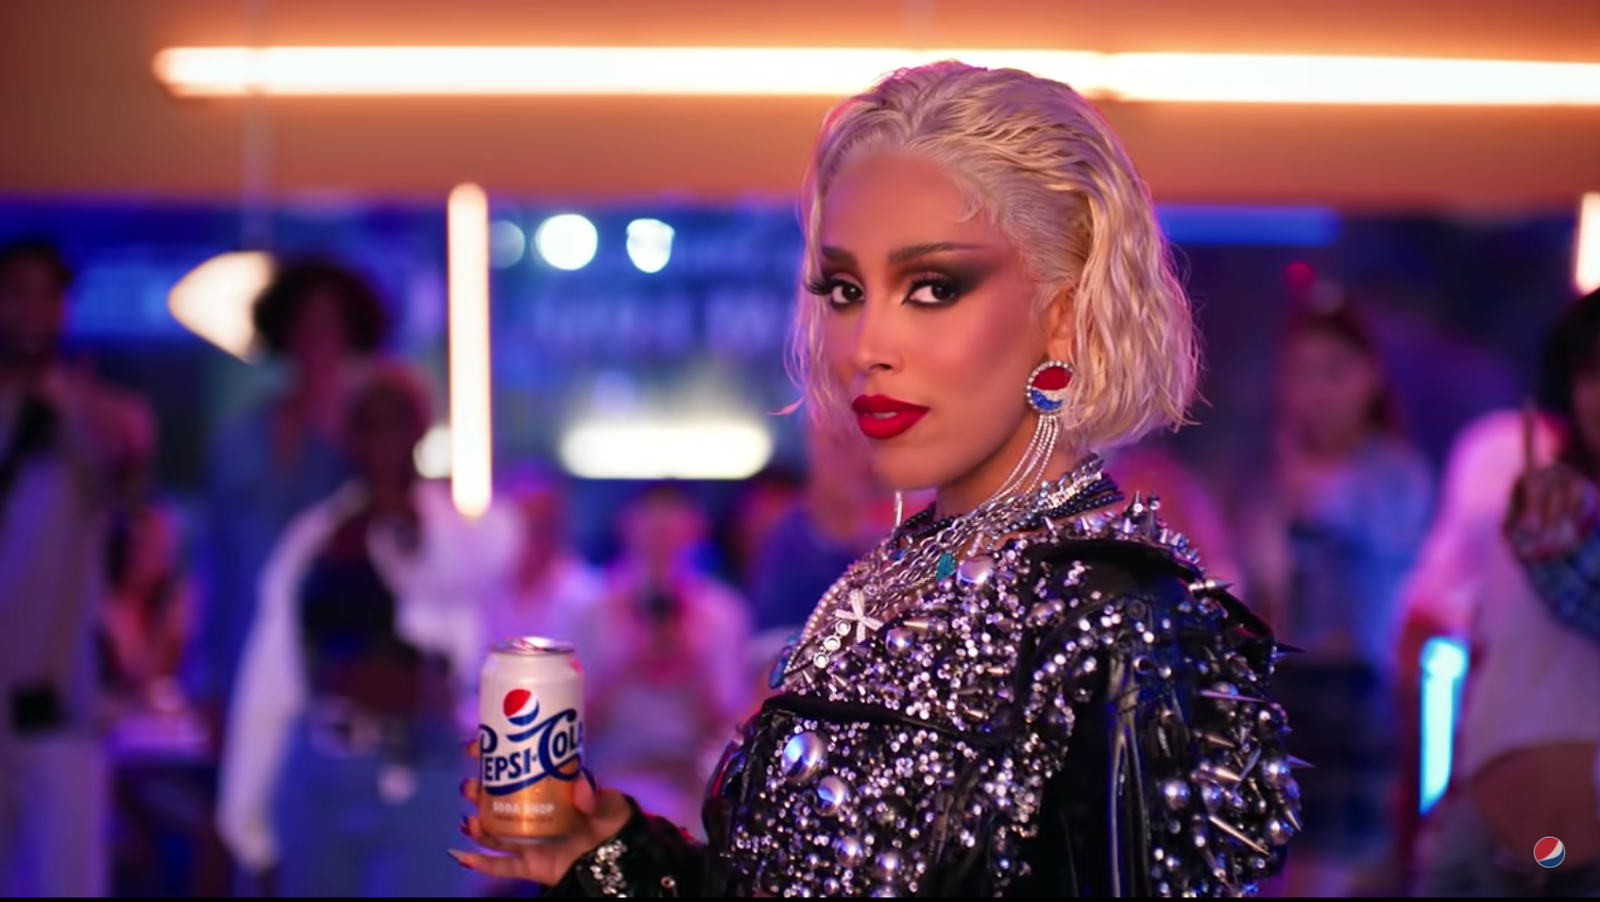 product marketing examples: pepsi cola